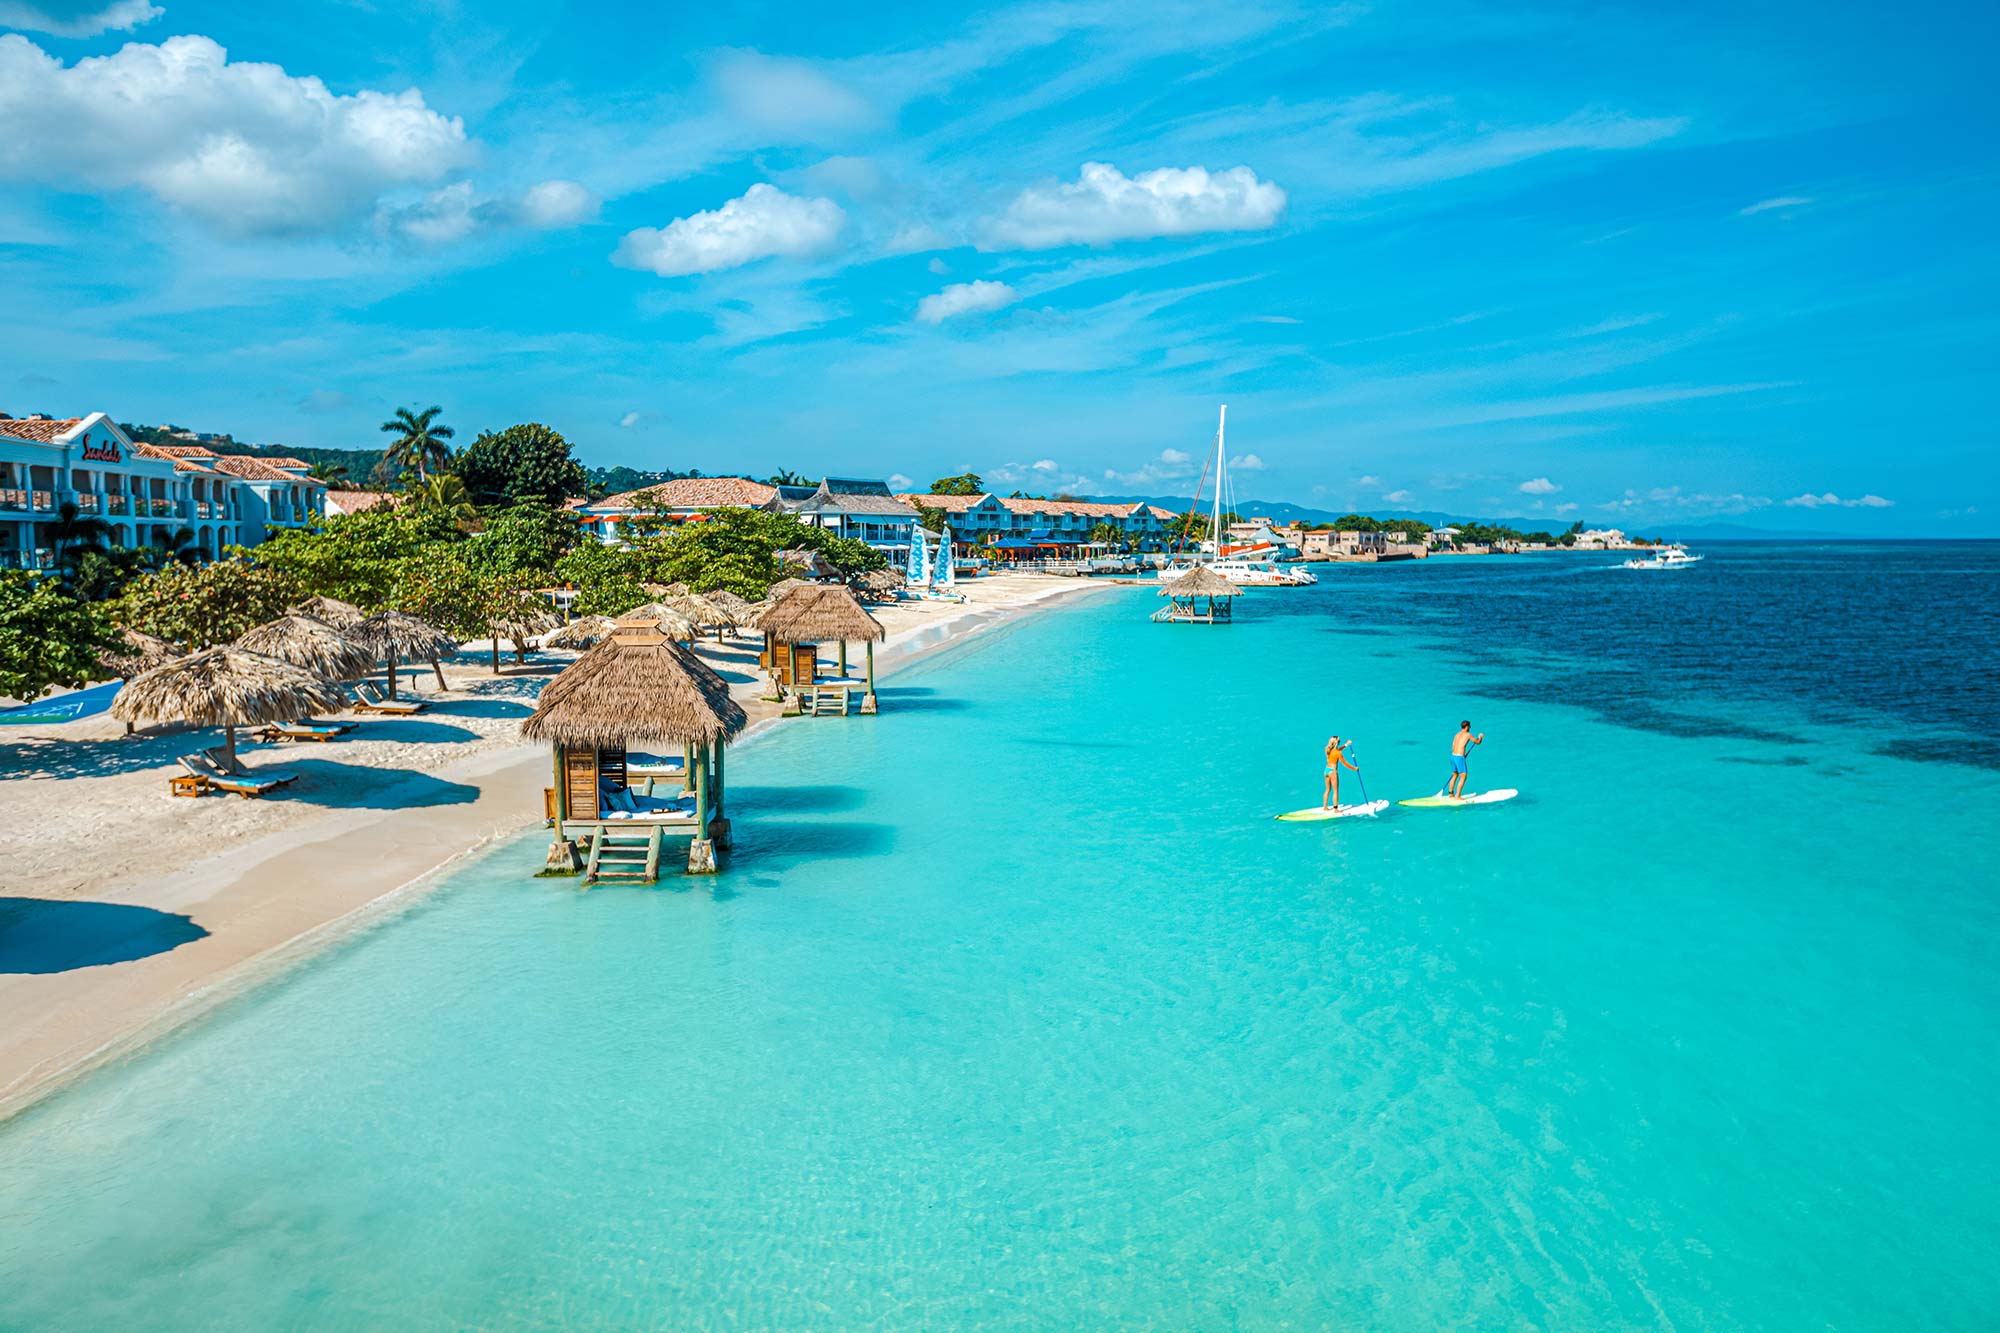 Sandals South Coast - A Reimagined All-Inclusive Paradise in Jamaica